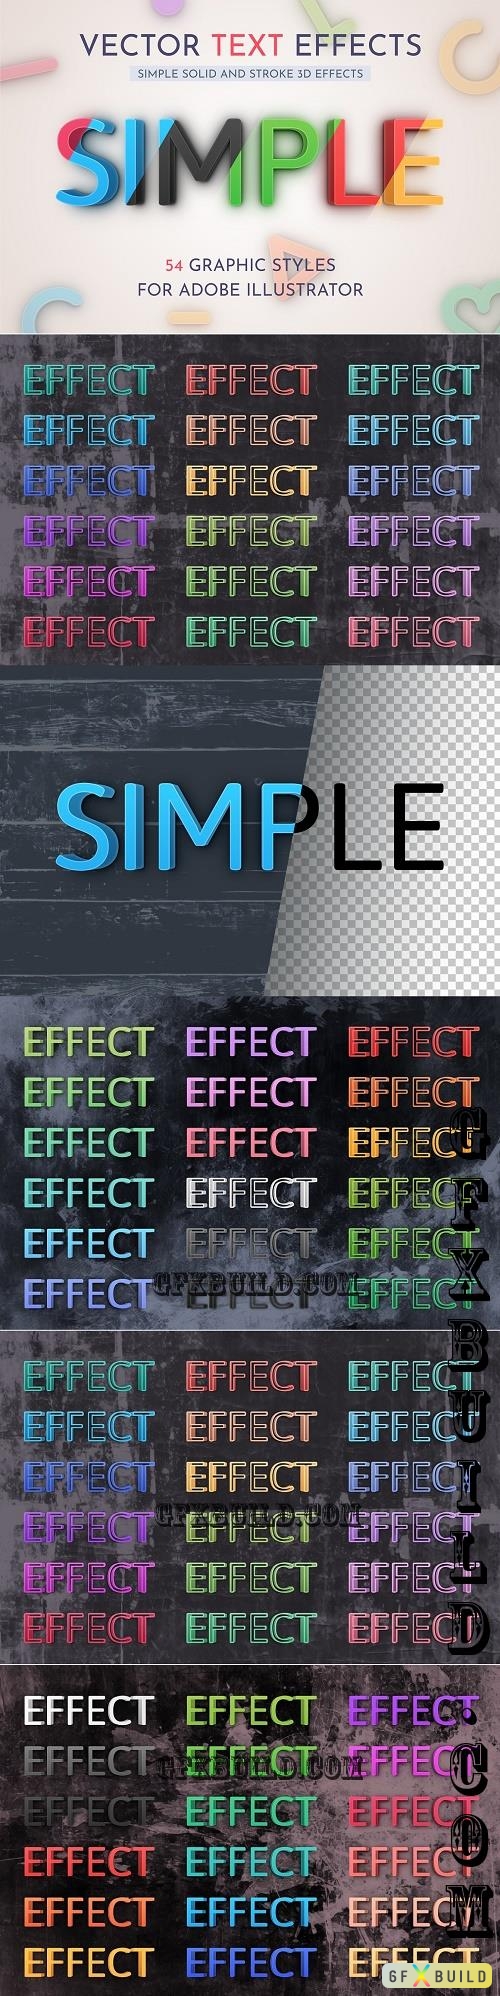 54 Simple Vector Text Effects - 21000125